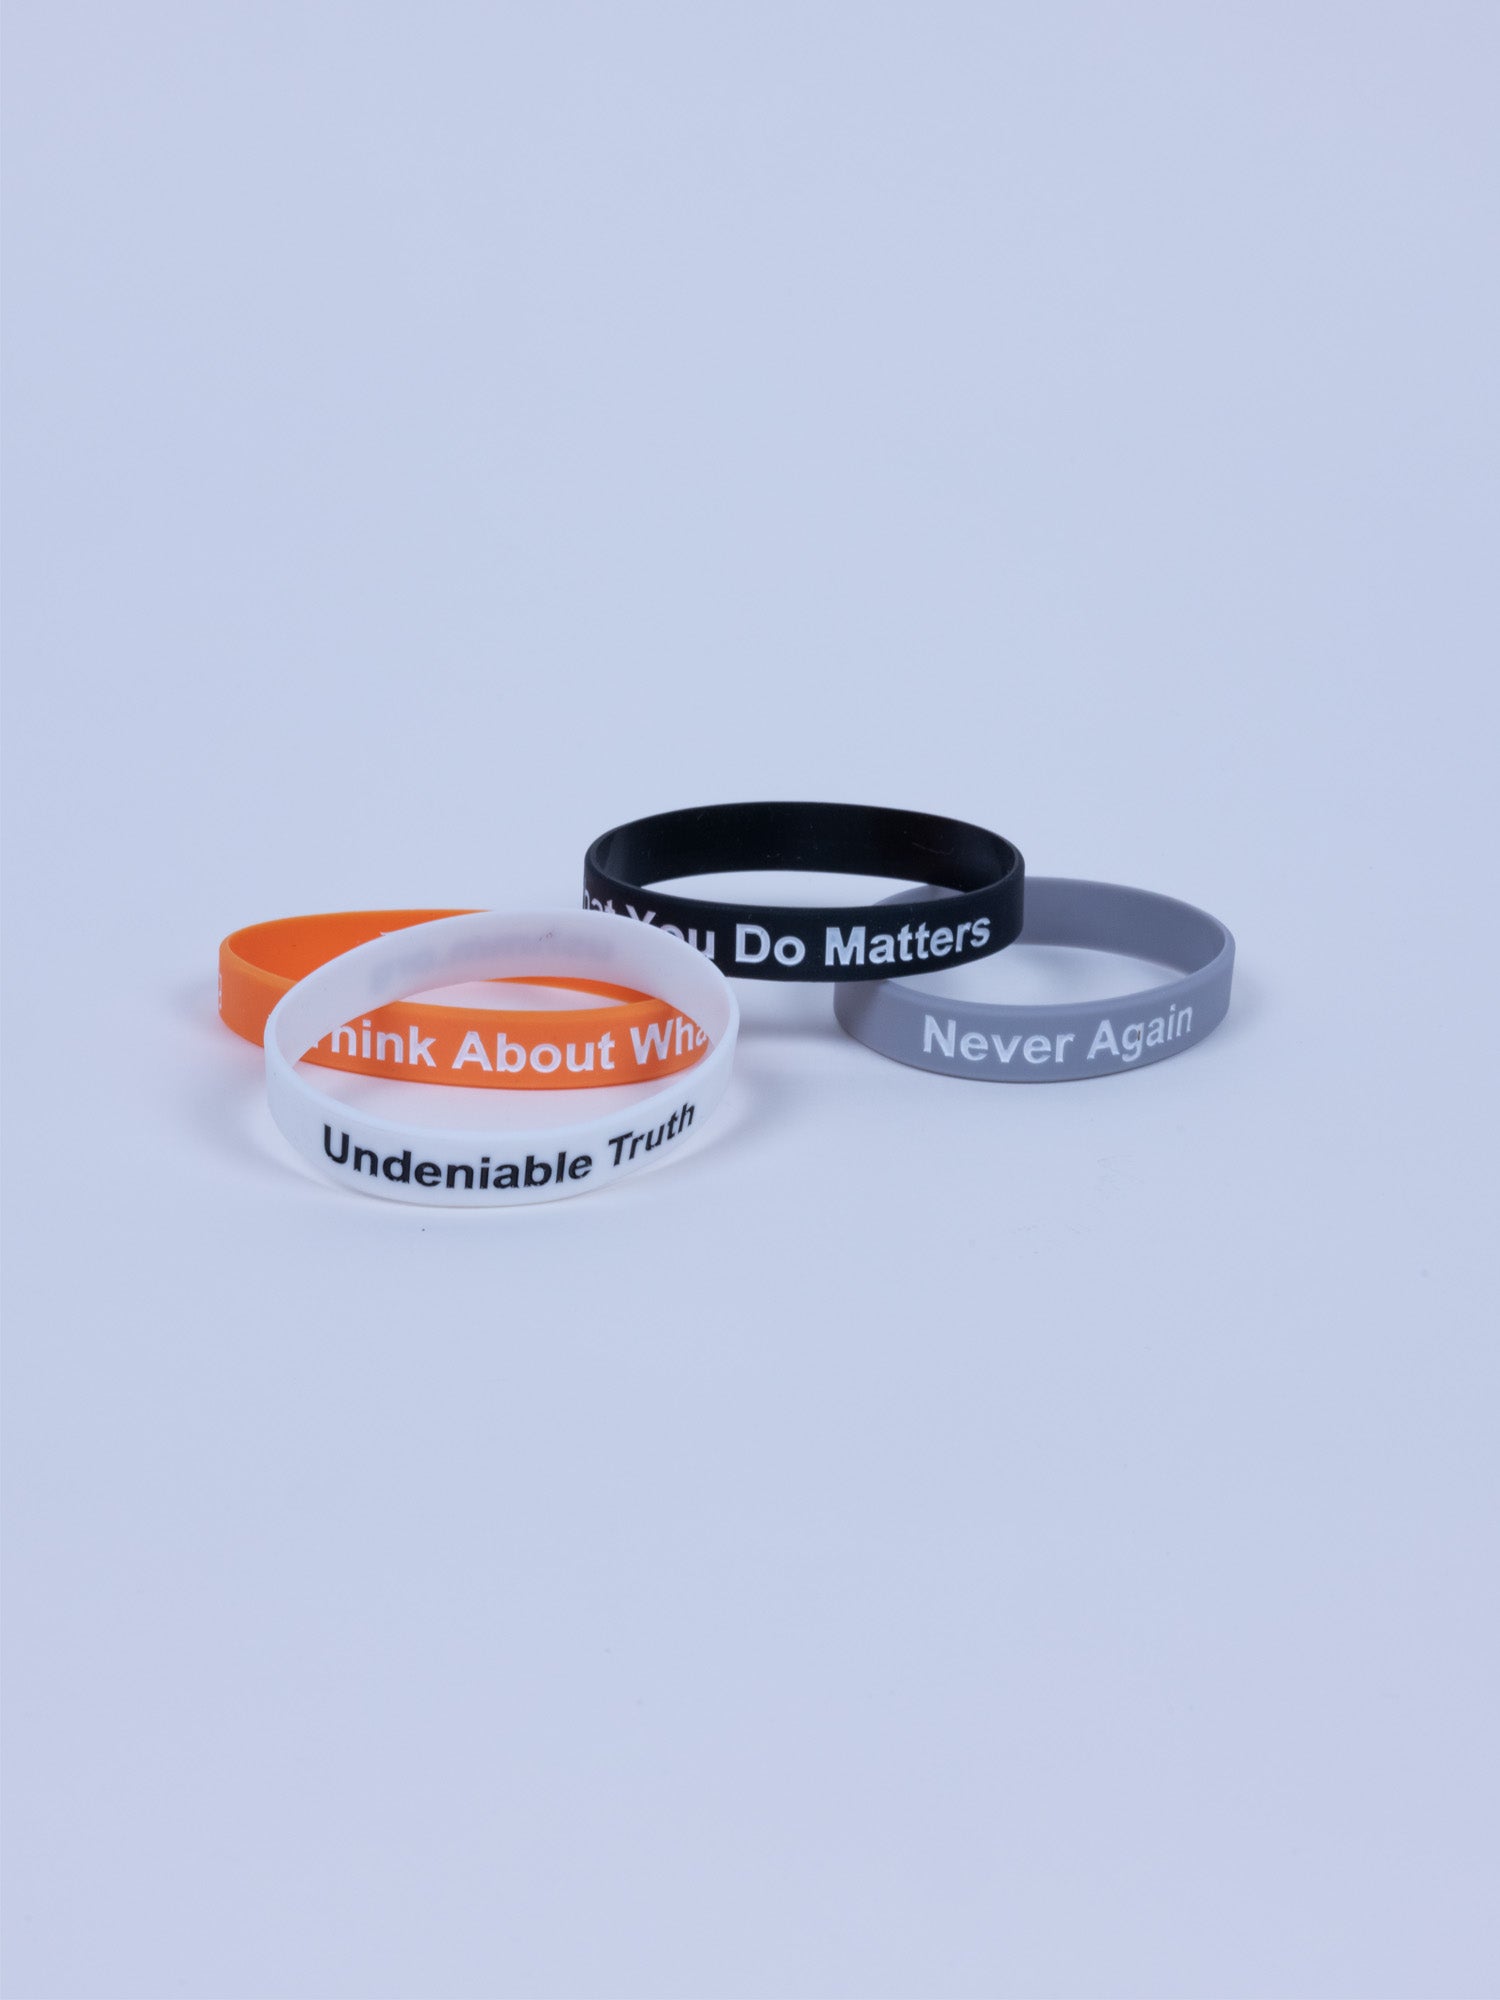 Be Kind Silicone Wristbands – Kipp Brothers